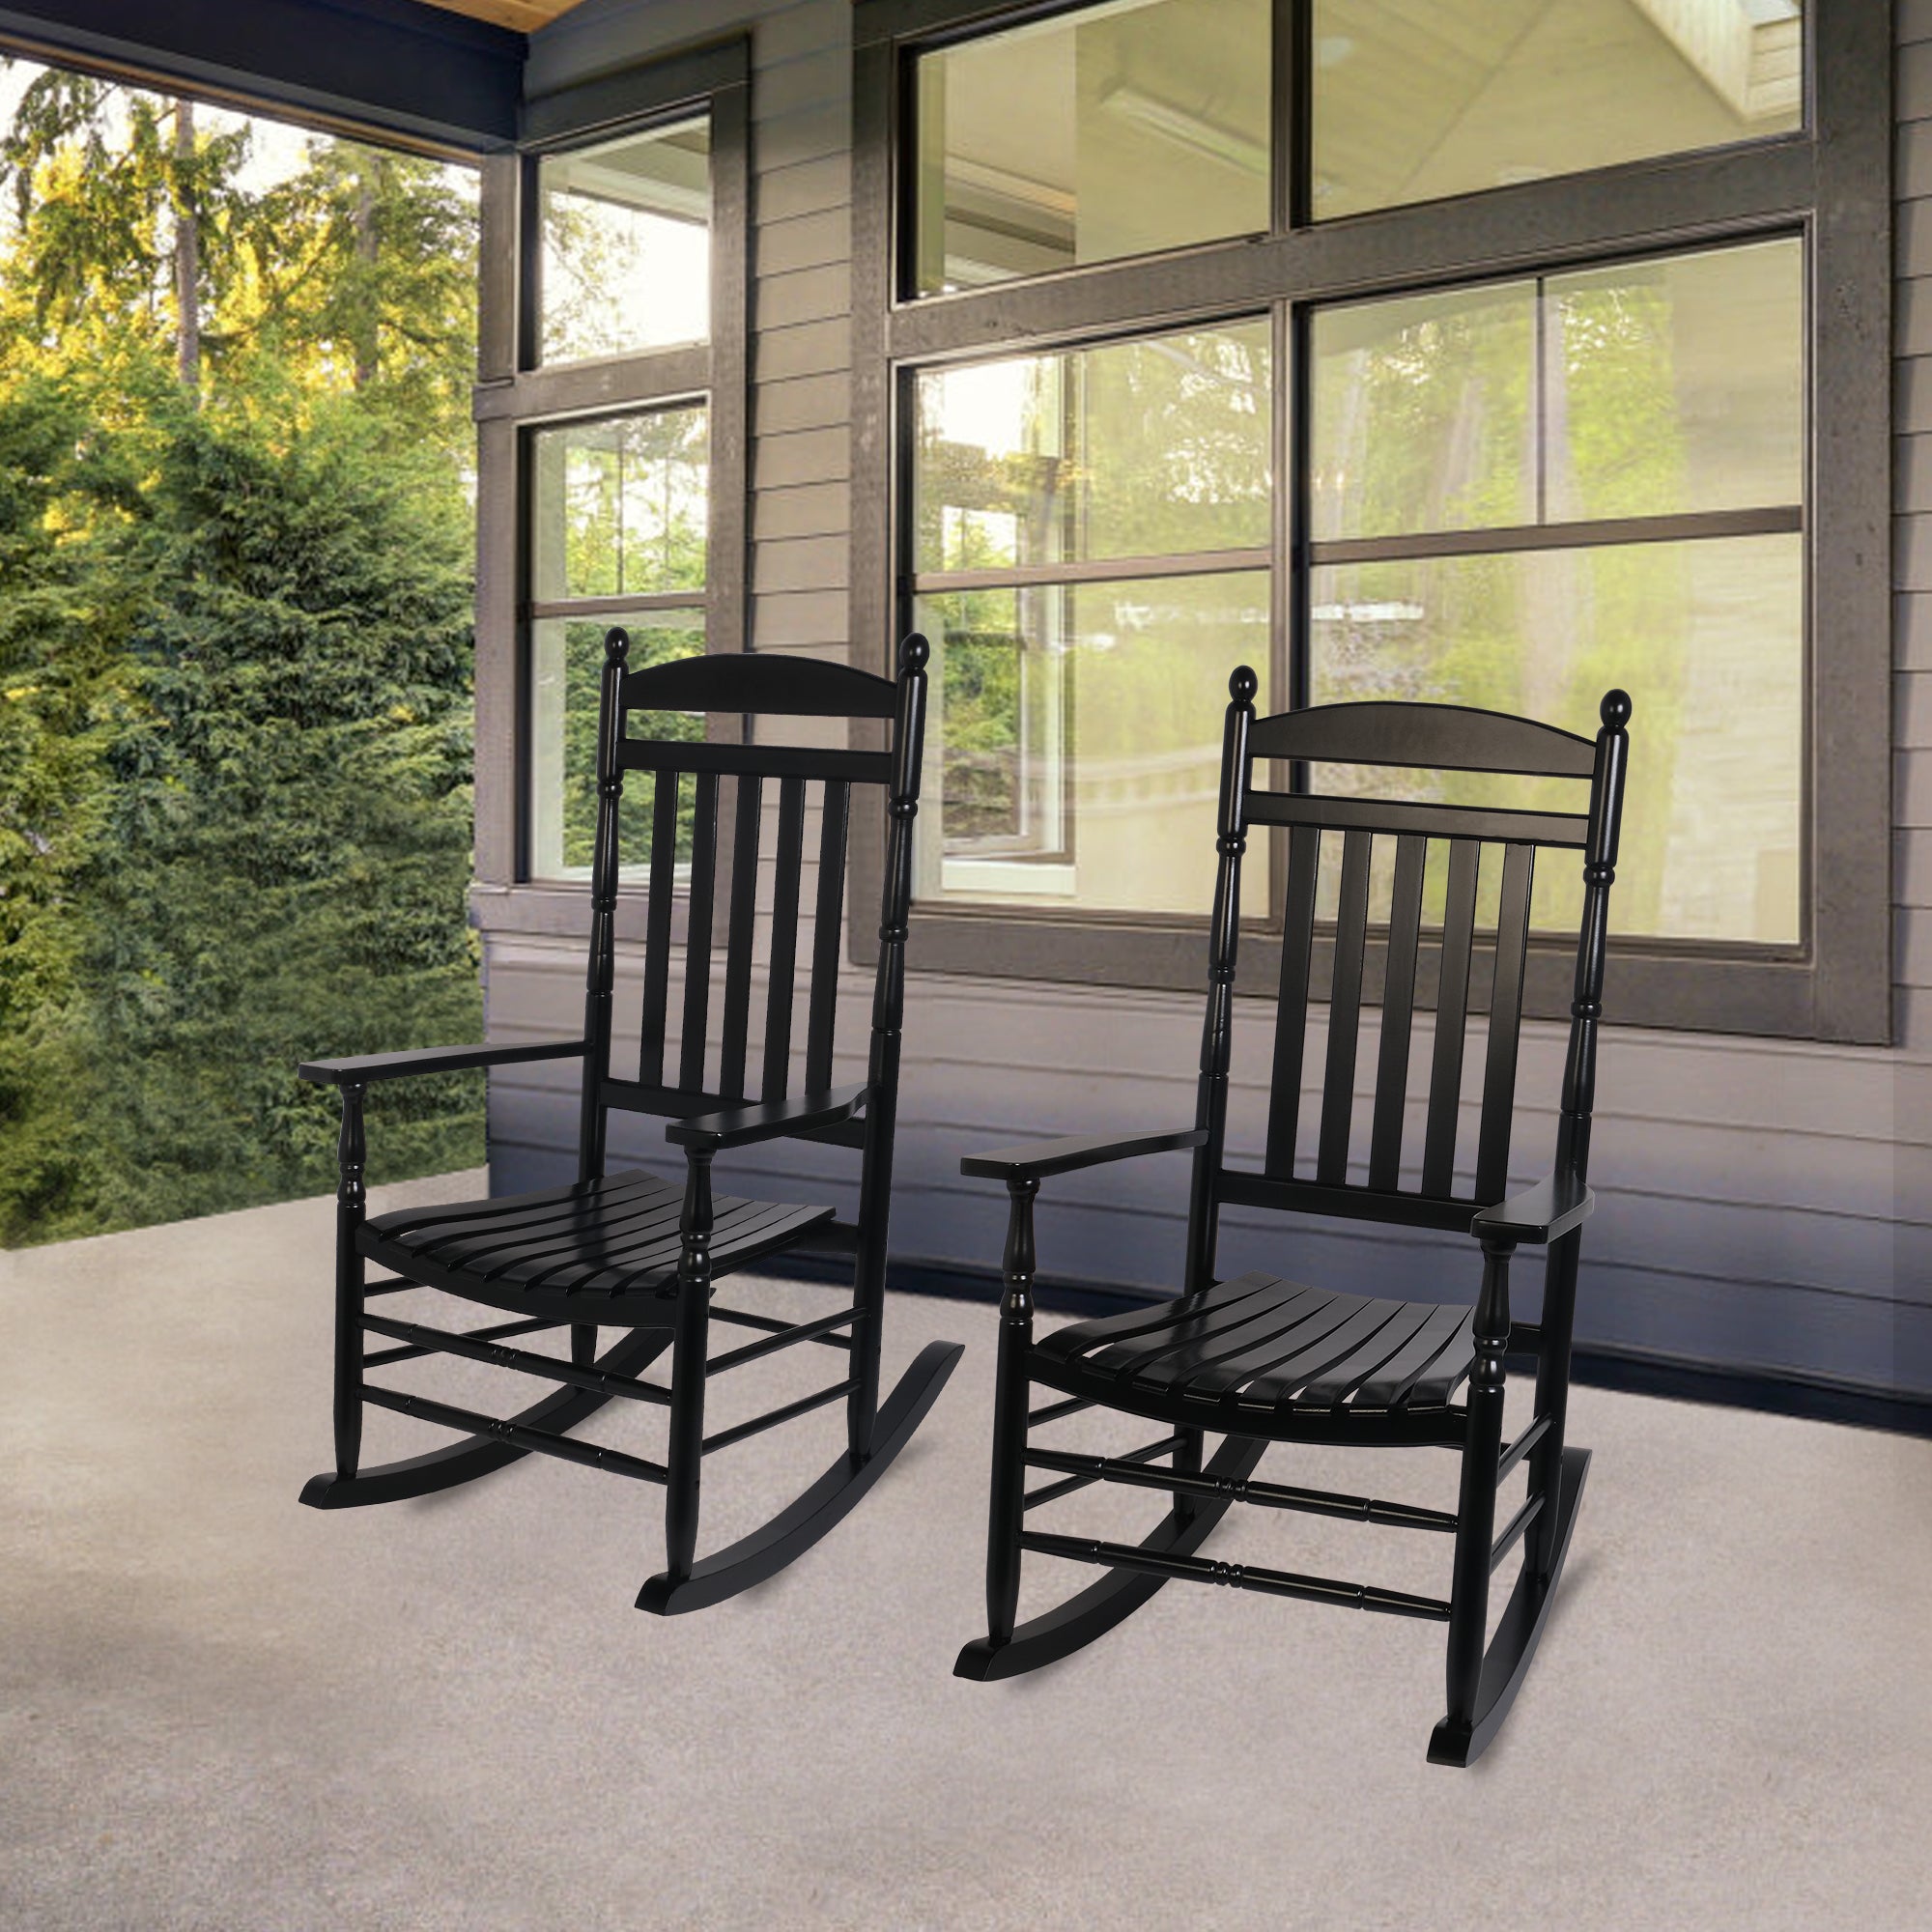 Set of 2 Outdoor Rocking Chairs Wooden High Back Rocker with Armrest for Garden Patio, Black